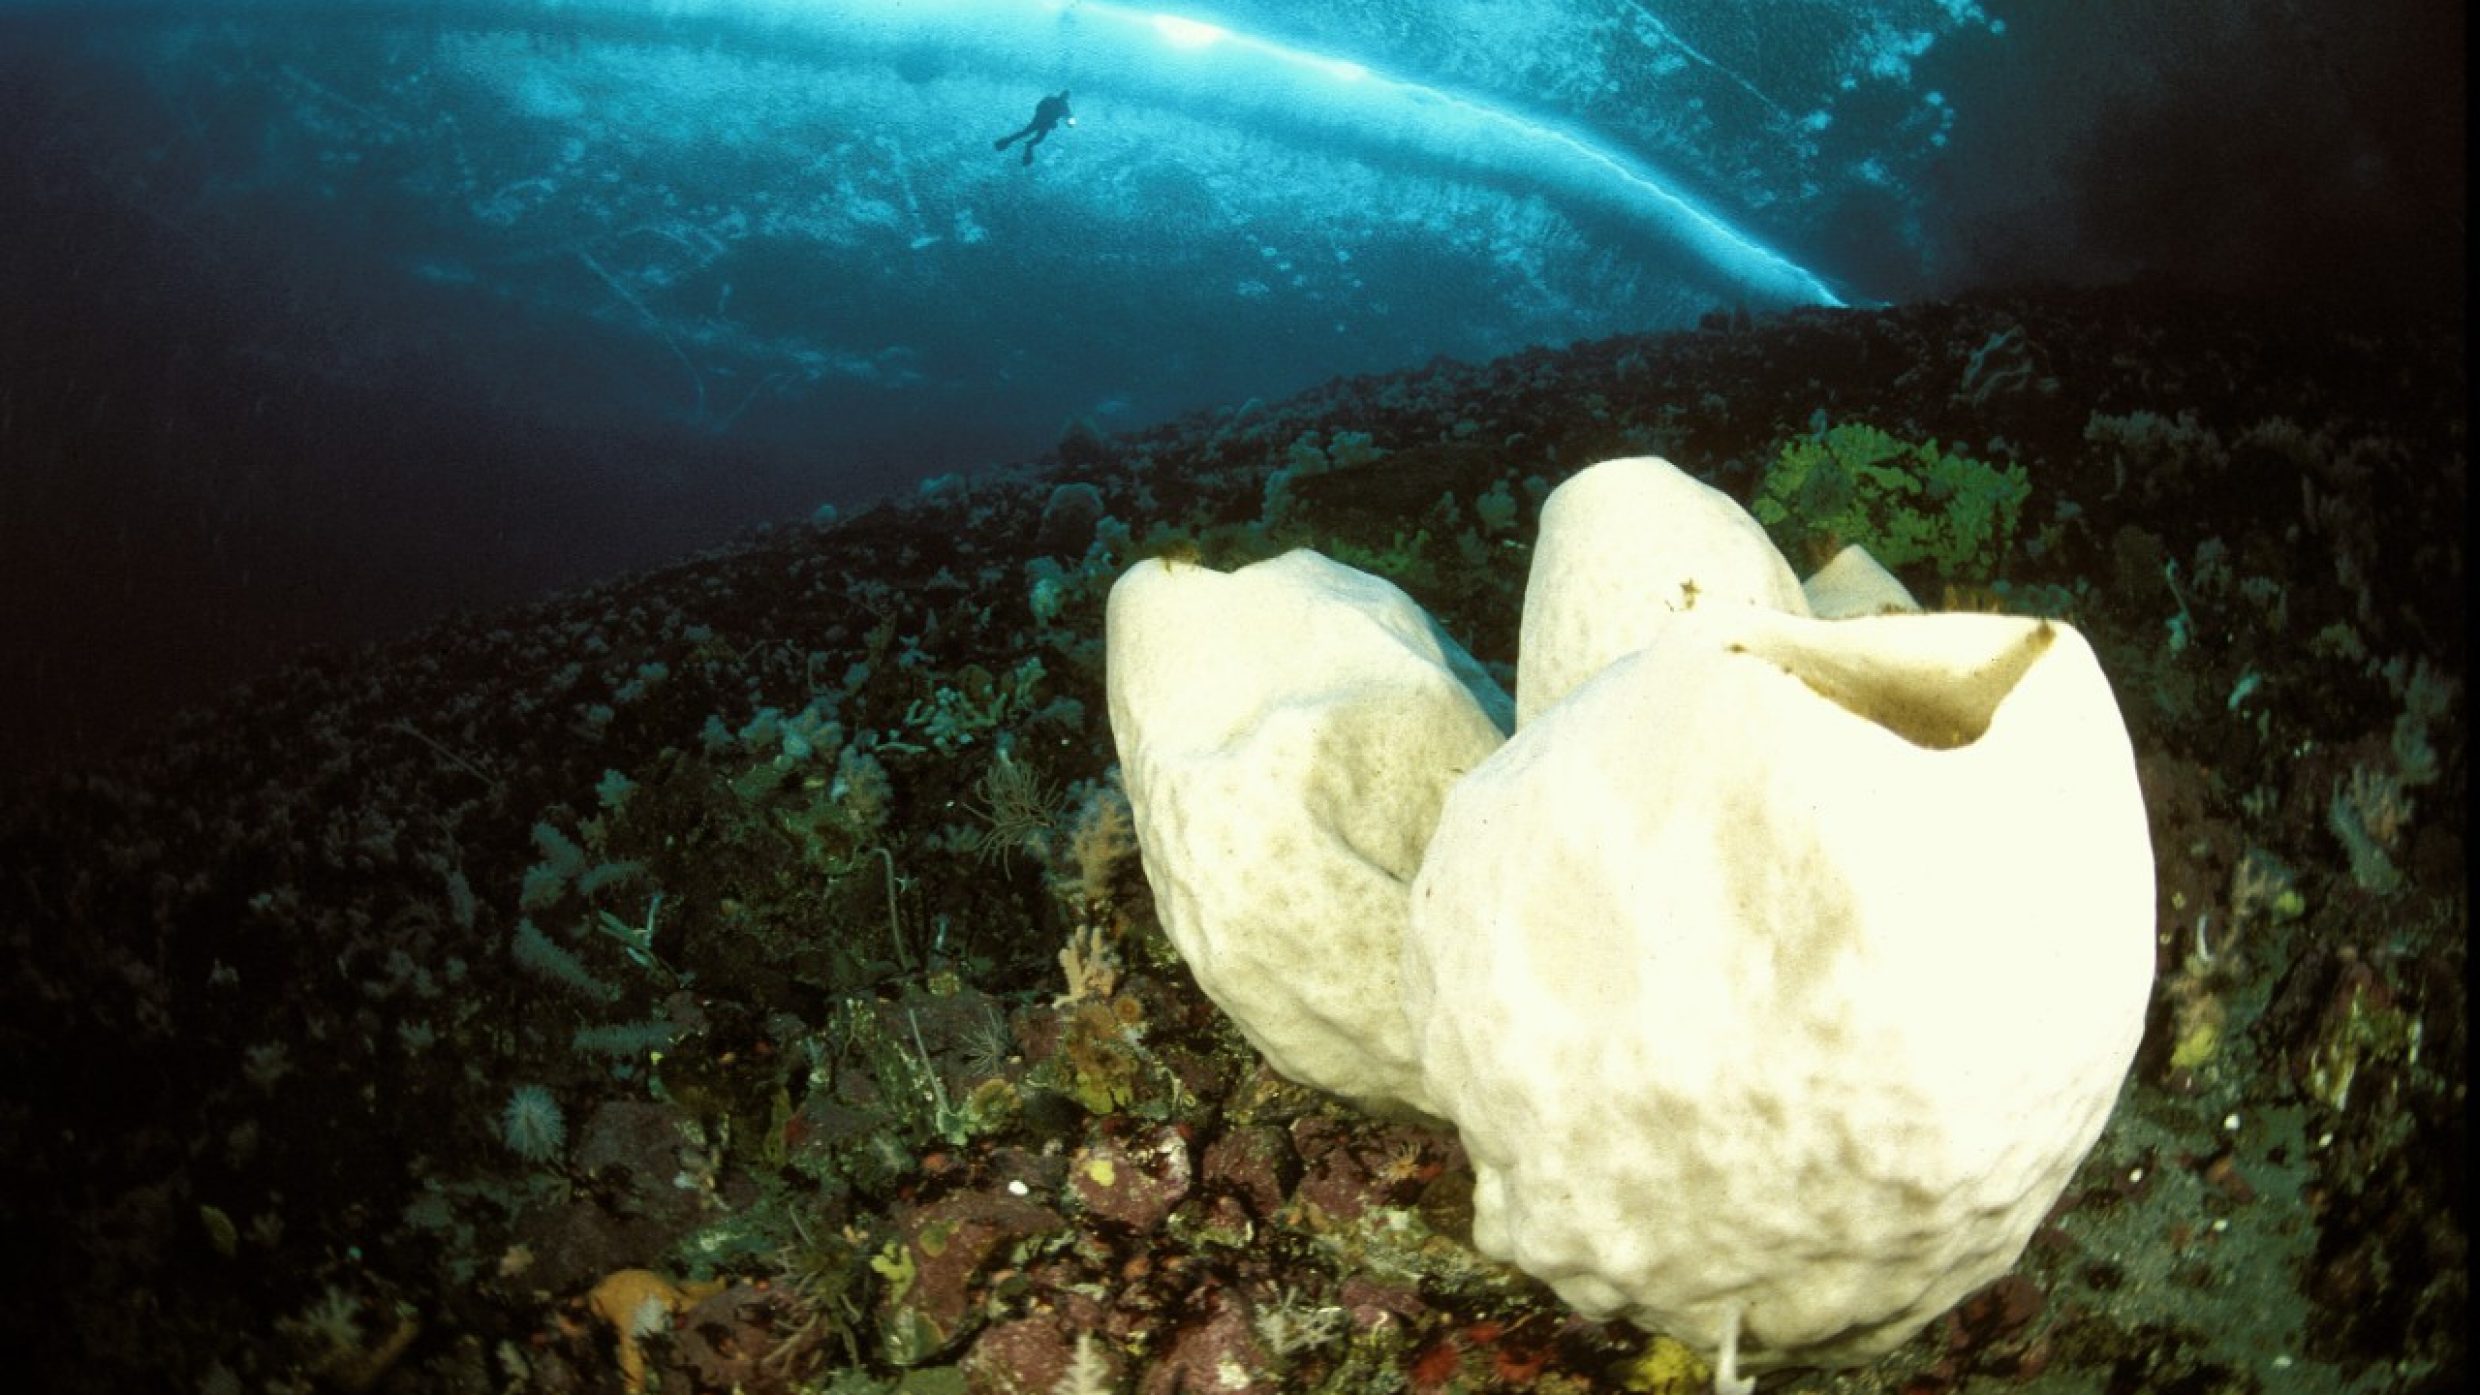  The Antarctic sponge Scolymastra joubini can live as long as 10 000 years. The sponges can grow up to 2 metres and have an extremely low metabolism due to the cold and darkness. 